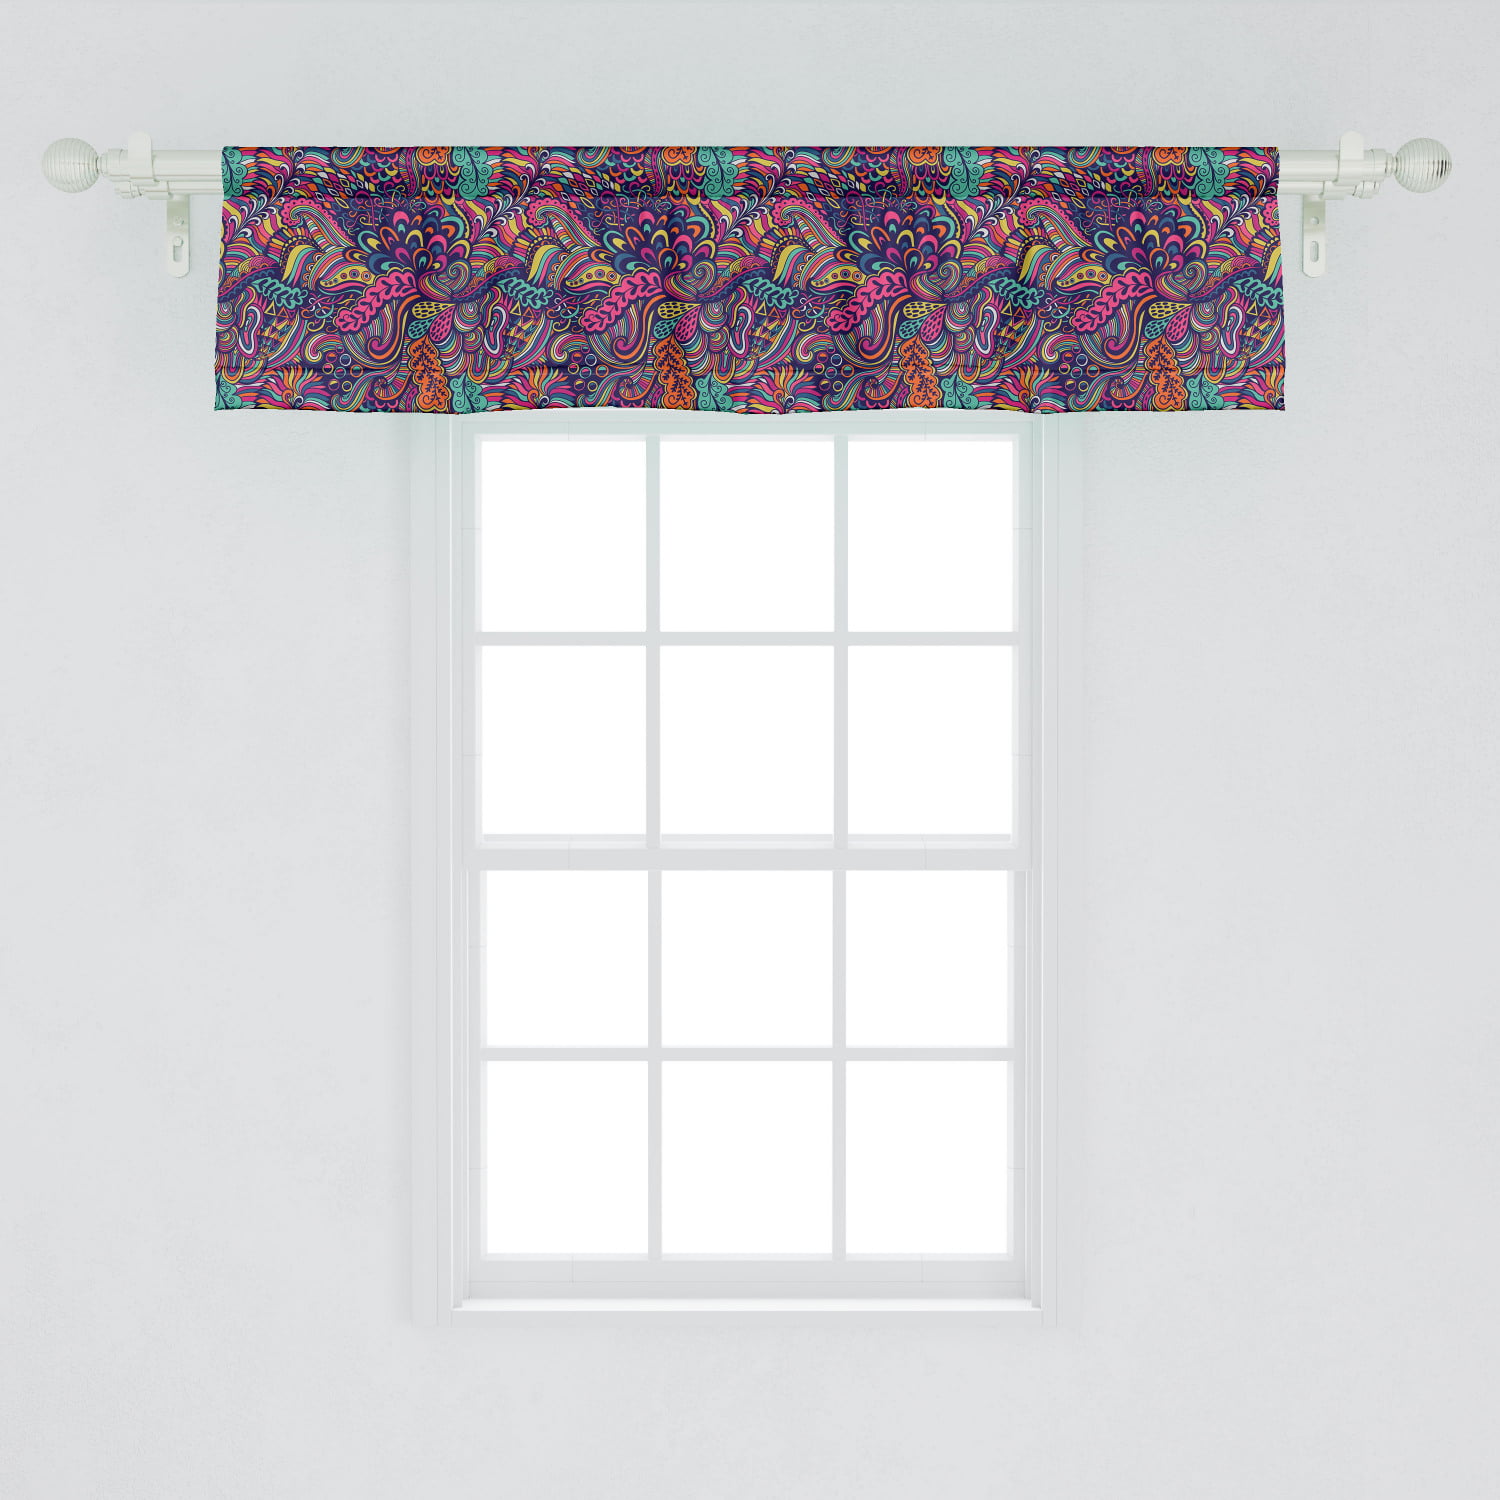 Ambesonne Leaves Window Valance, Ginkgo Biloba Maidenhair Tree Leaves Funky  Colored Abstract Foliage Composition, Curtain Valance for Kitchen Bedroom  ...